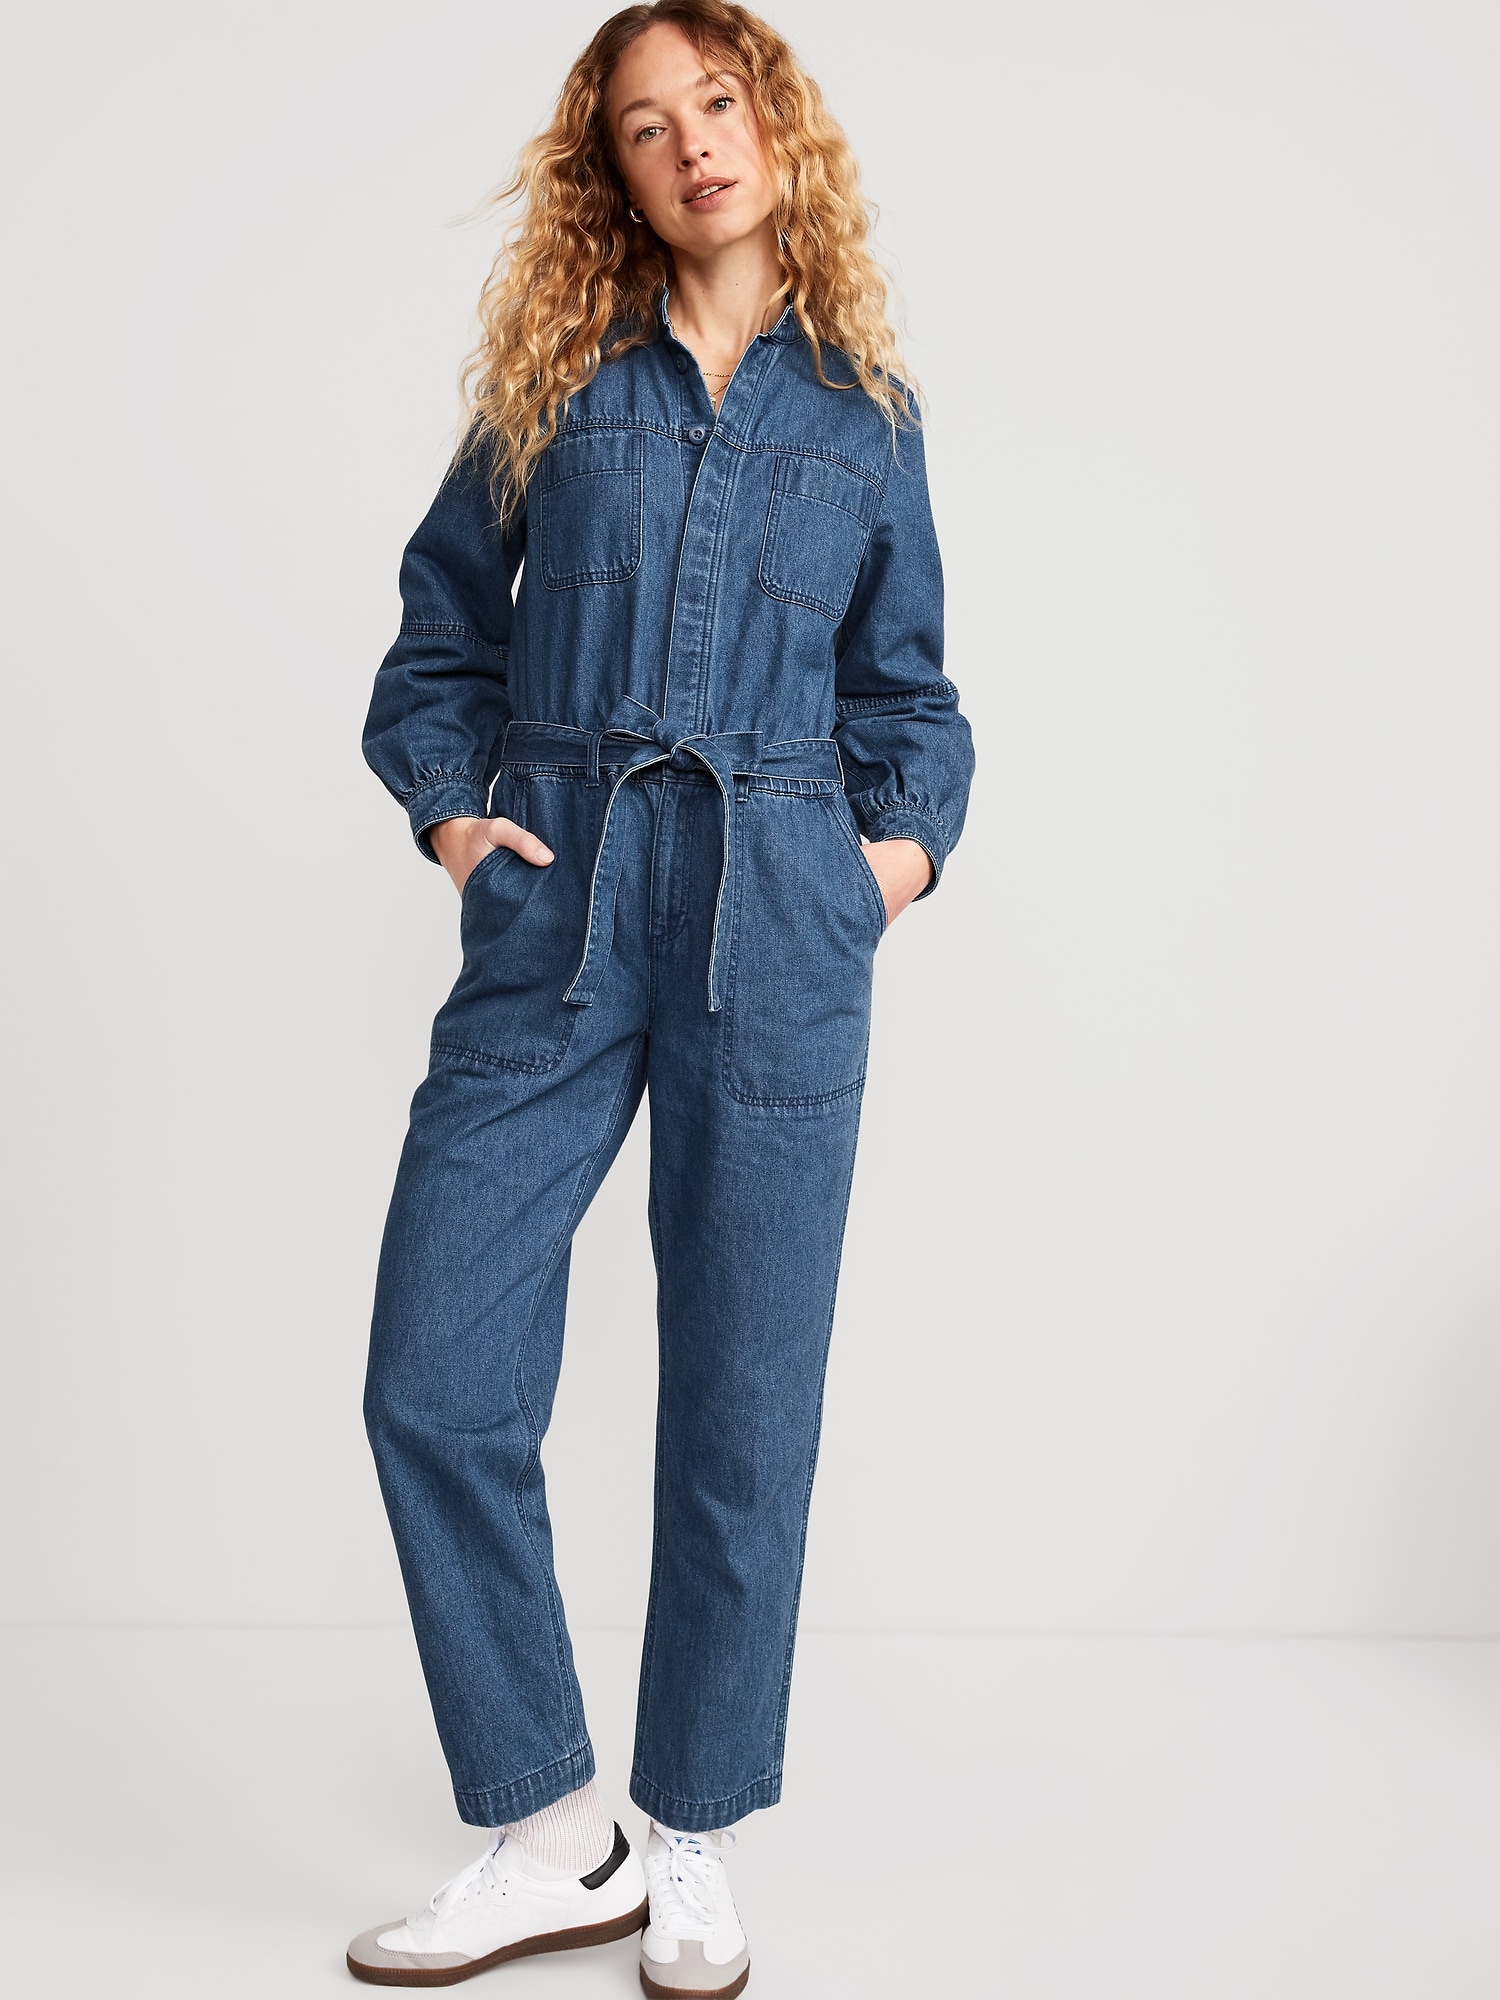 Old Navy Collarless Jean Utility Jumpsuit for Women blue. 1